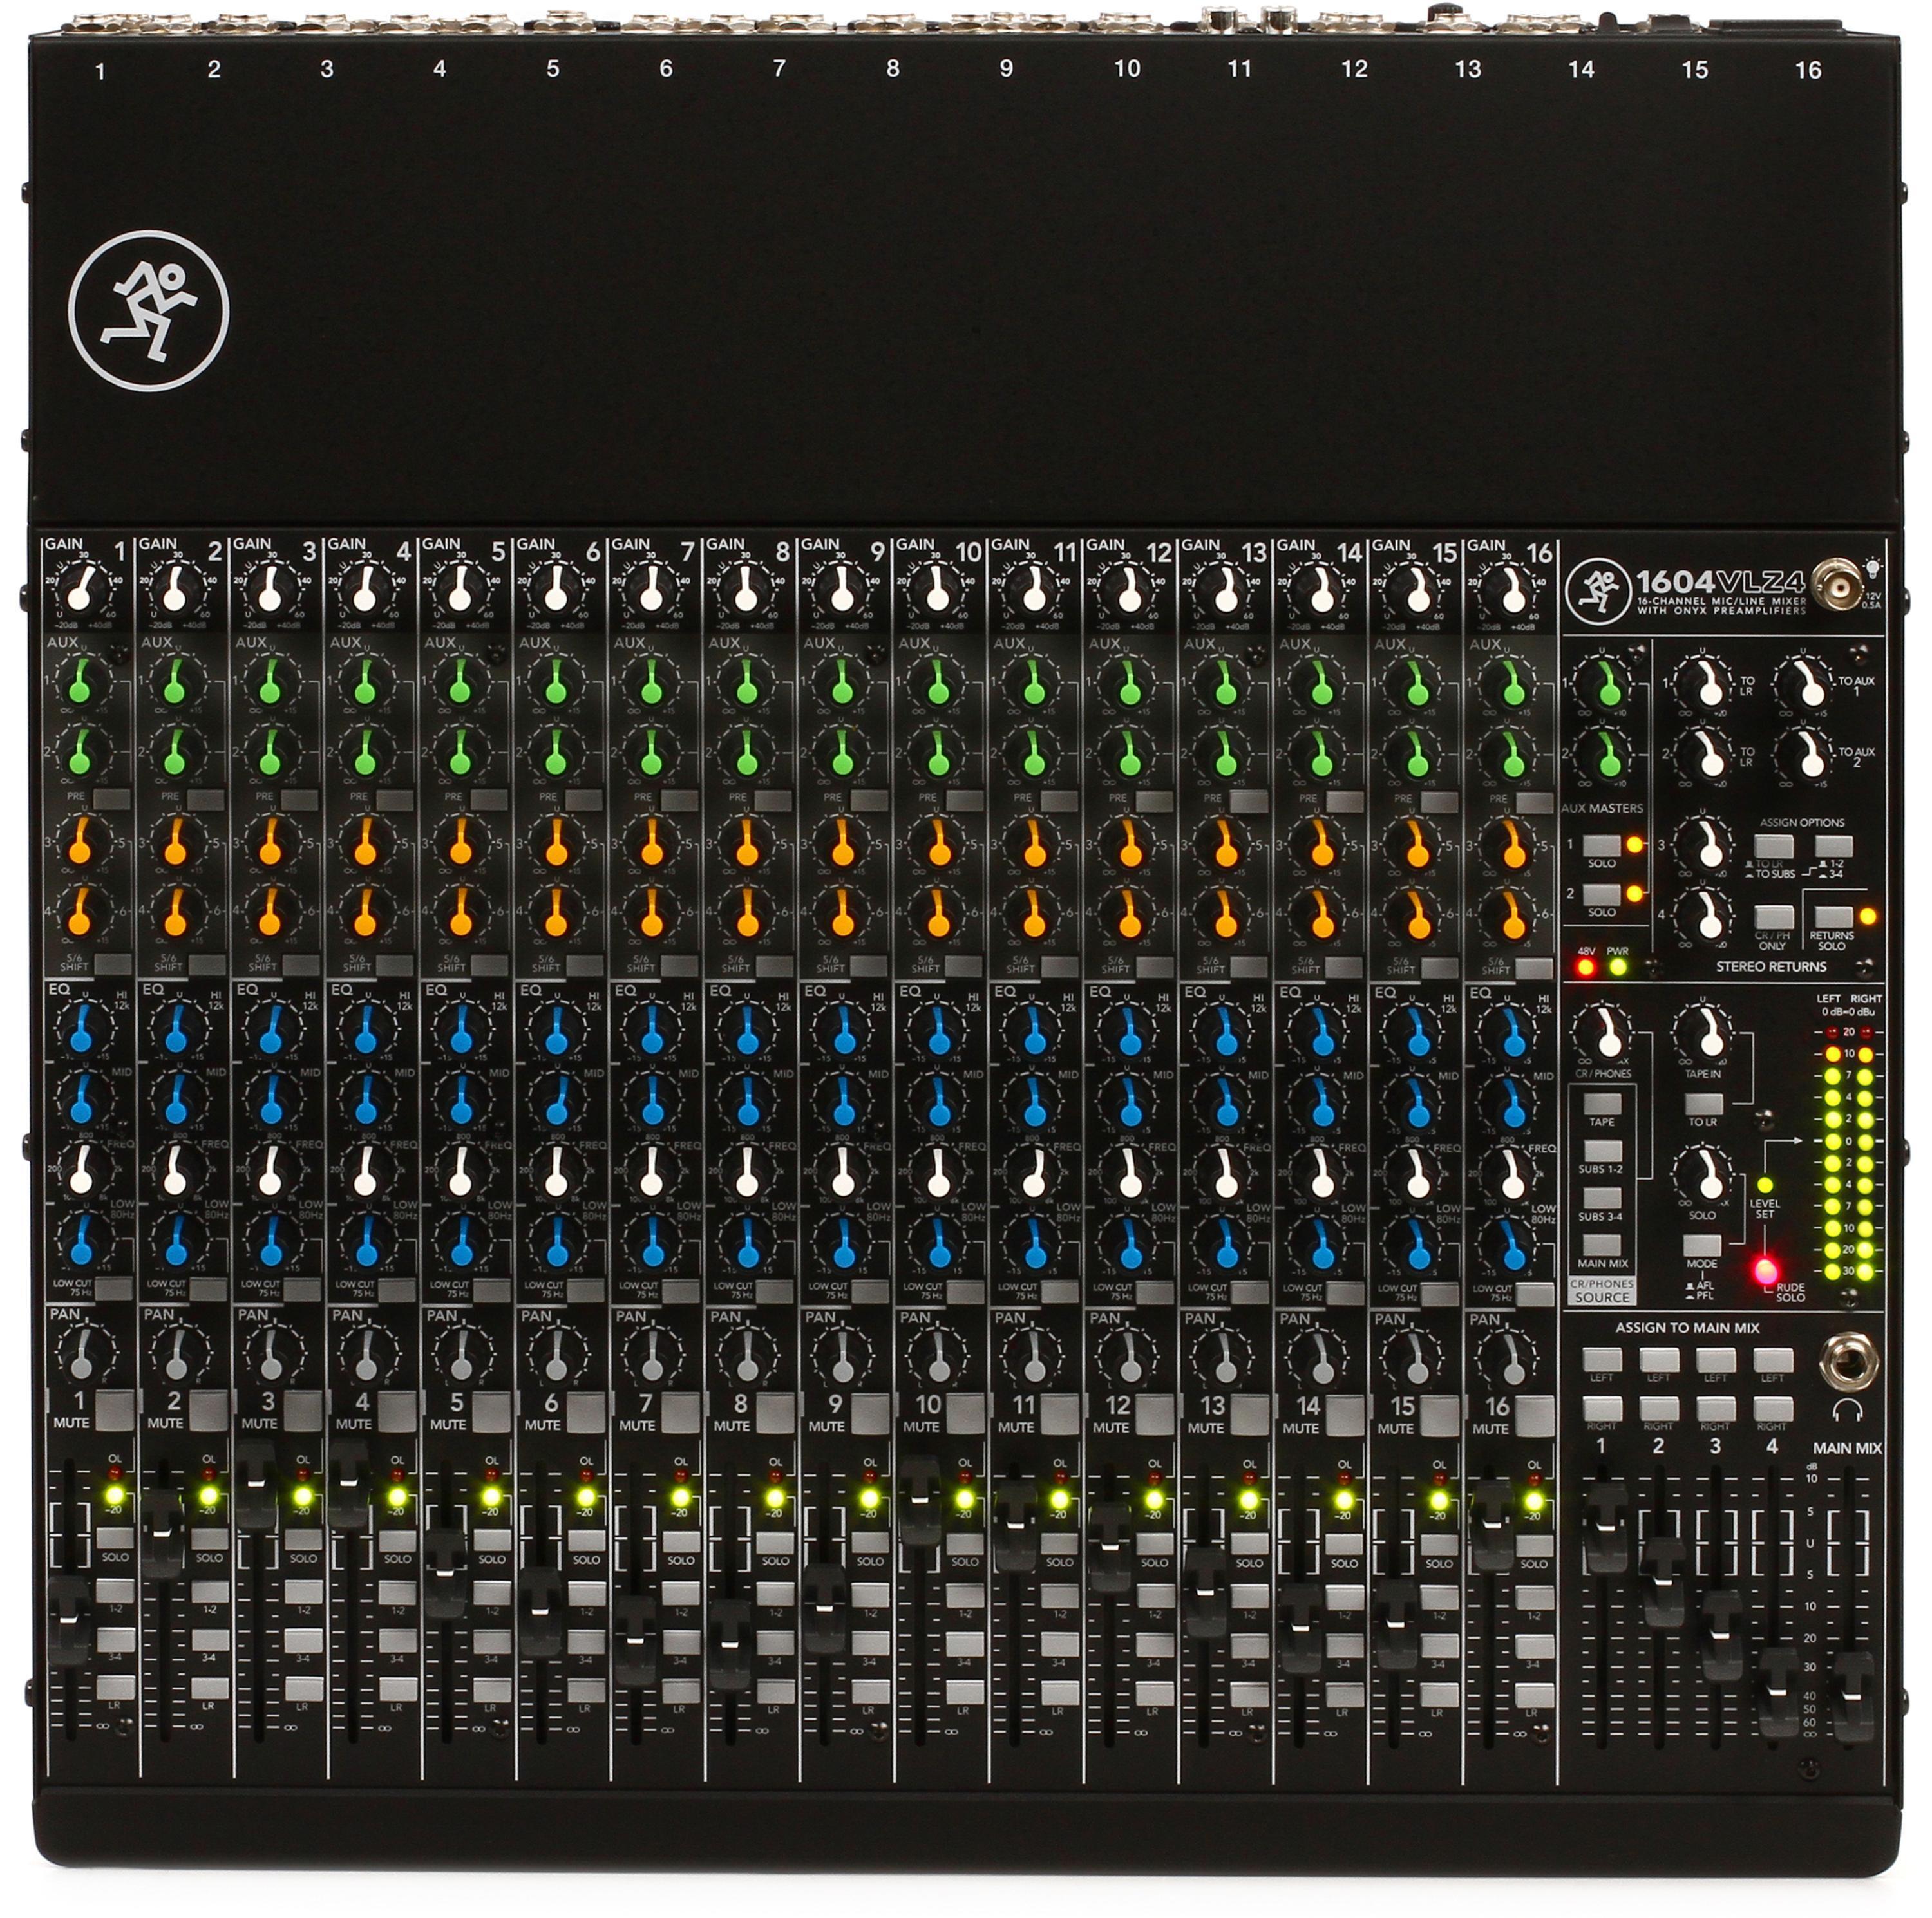 Mackie 1604 Mixer Dust Covers for VLZ4, VLZ3 and VLZ Pro Series